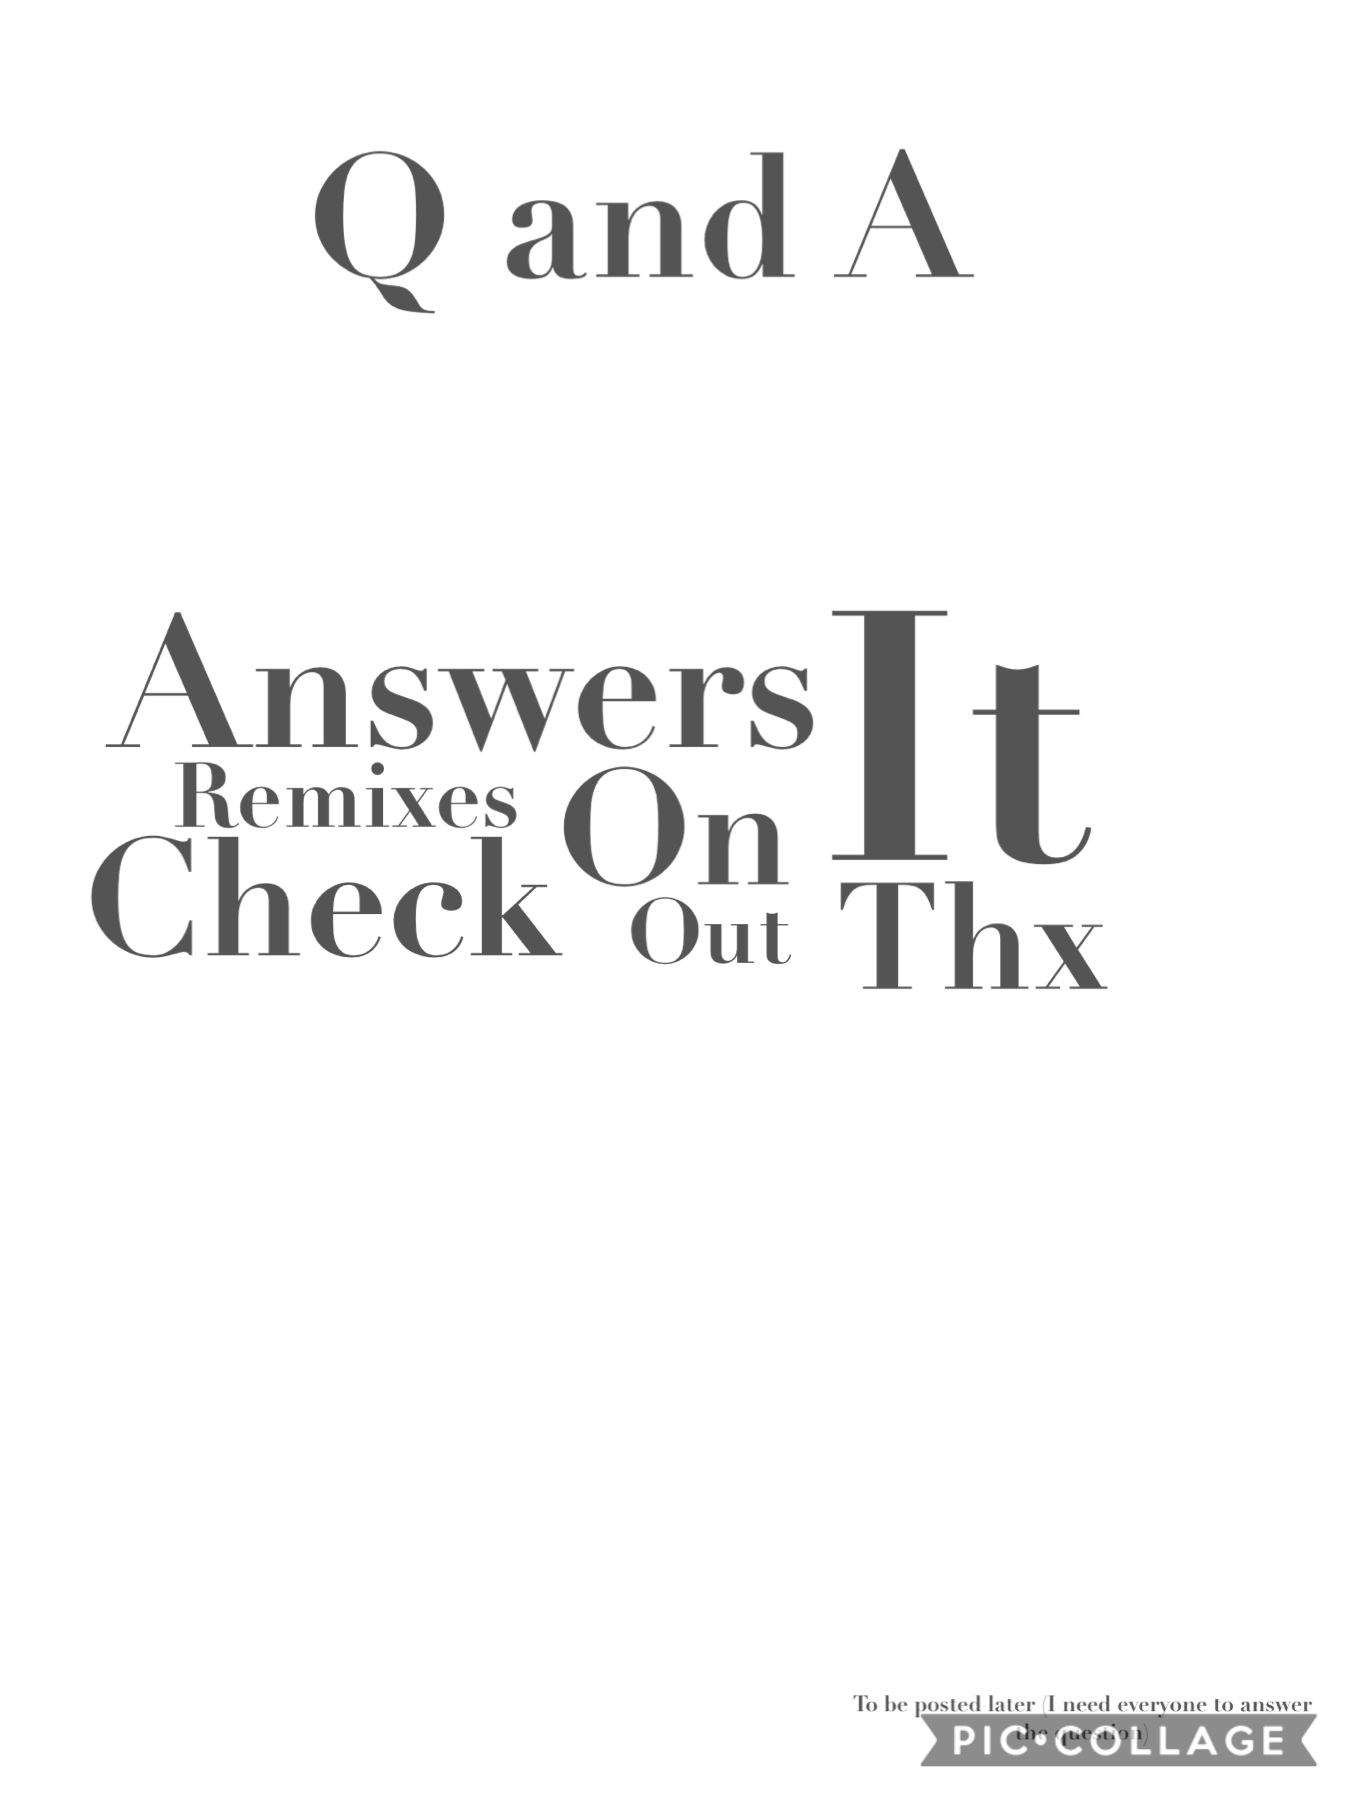 Q and A Answers!
To be posted later! I need everyone to finish answering the question I sent on ur acc